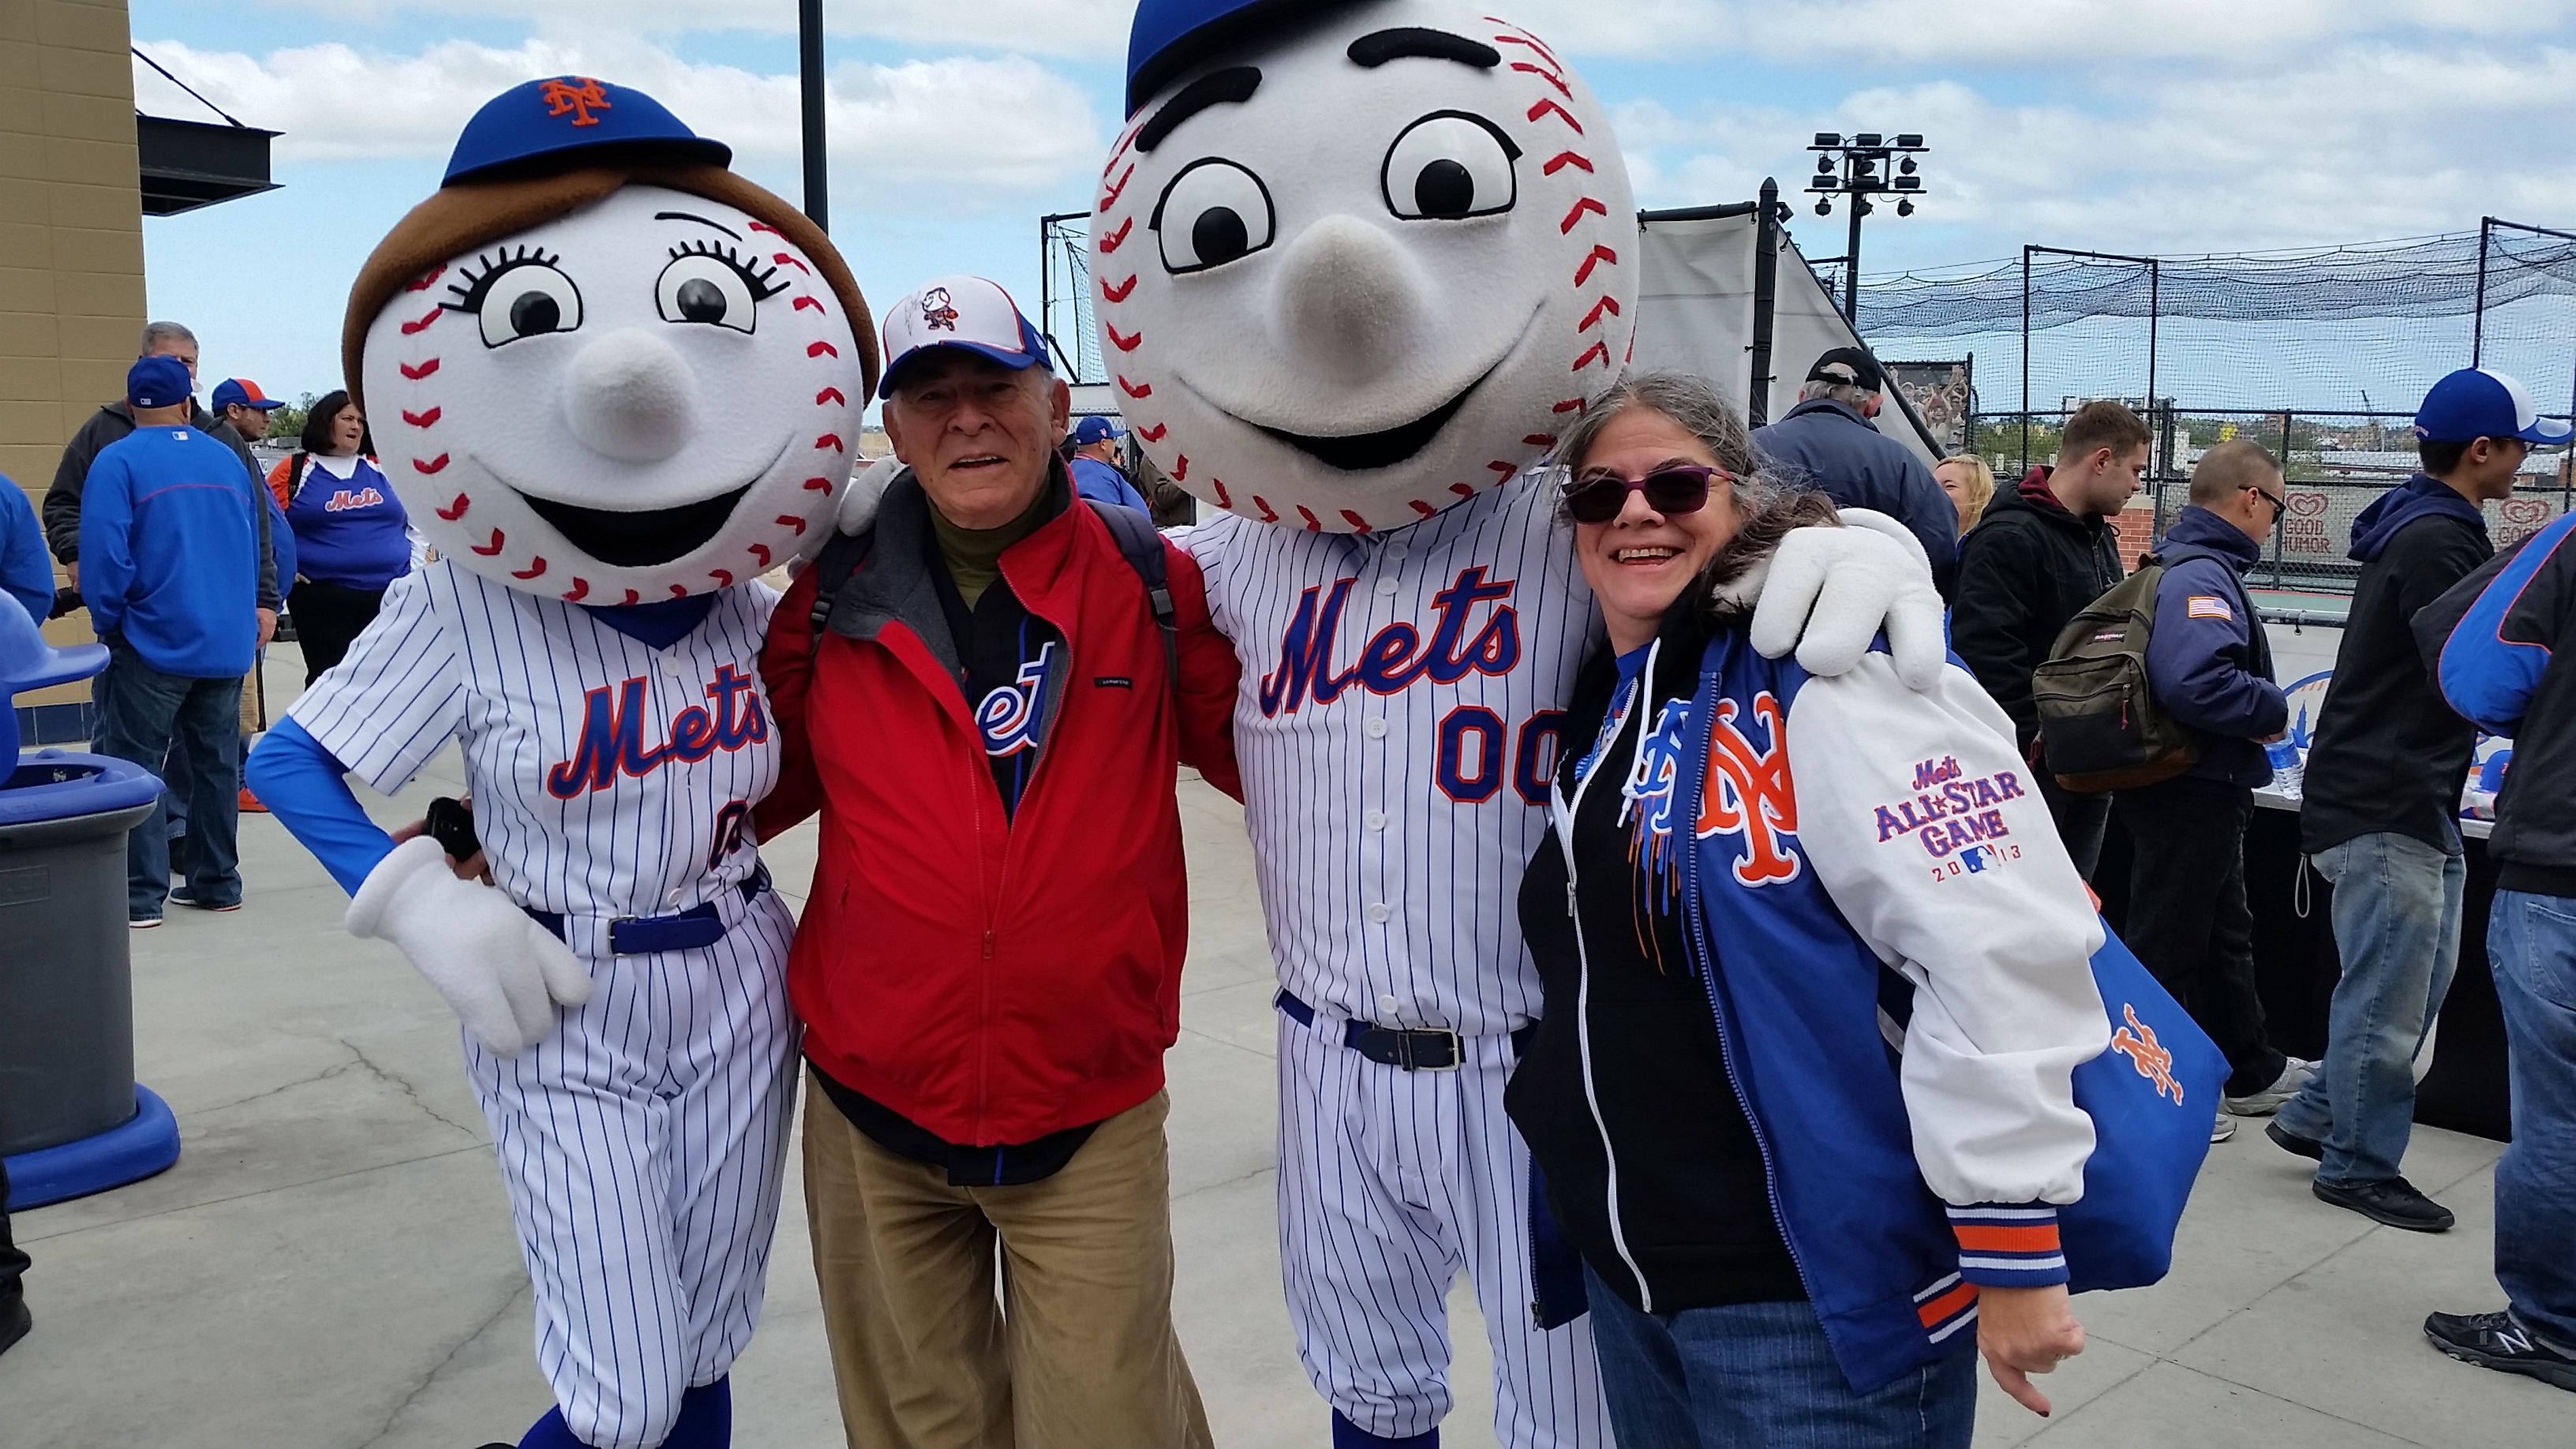 The Mets broadcasters loved this young fan's homemade papier mache Mr. Met  costume